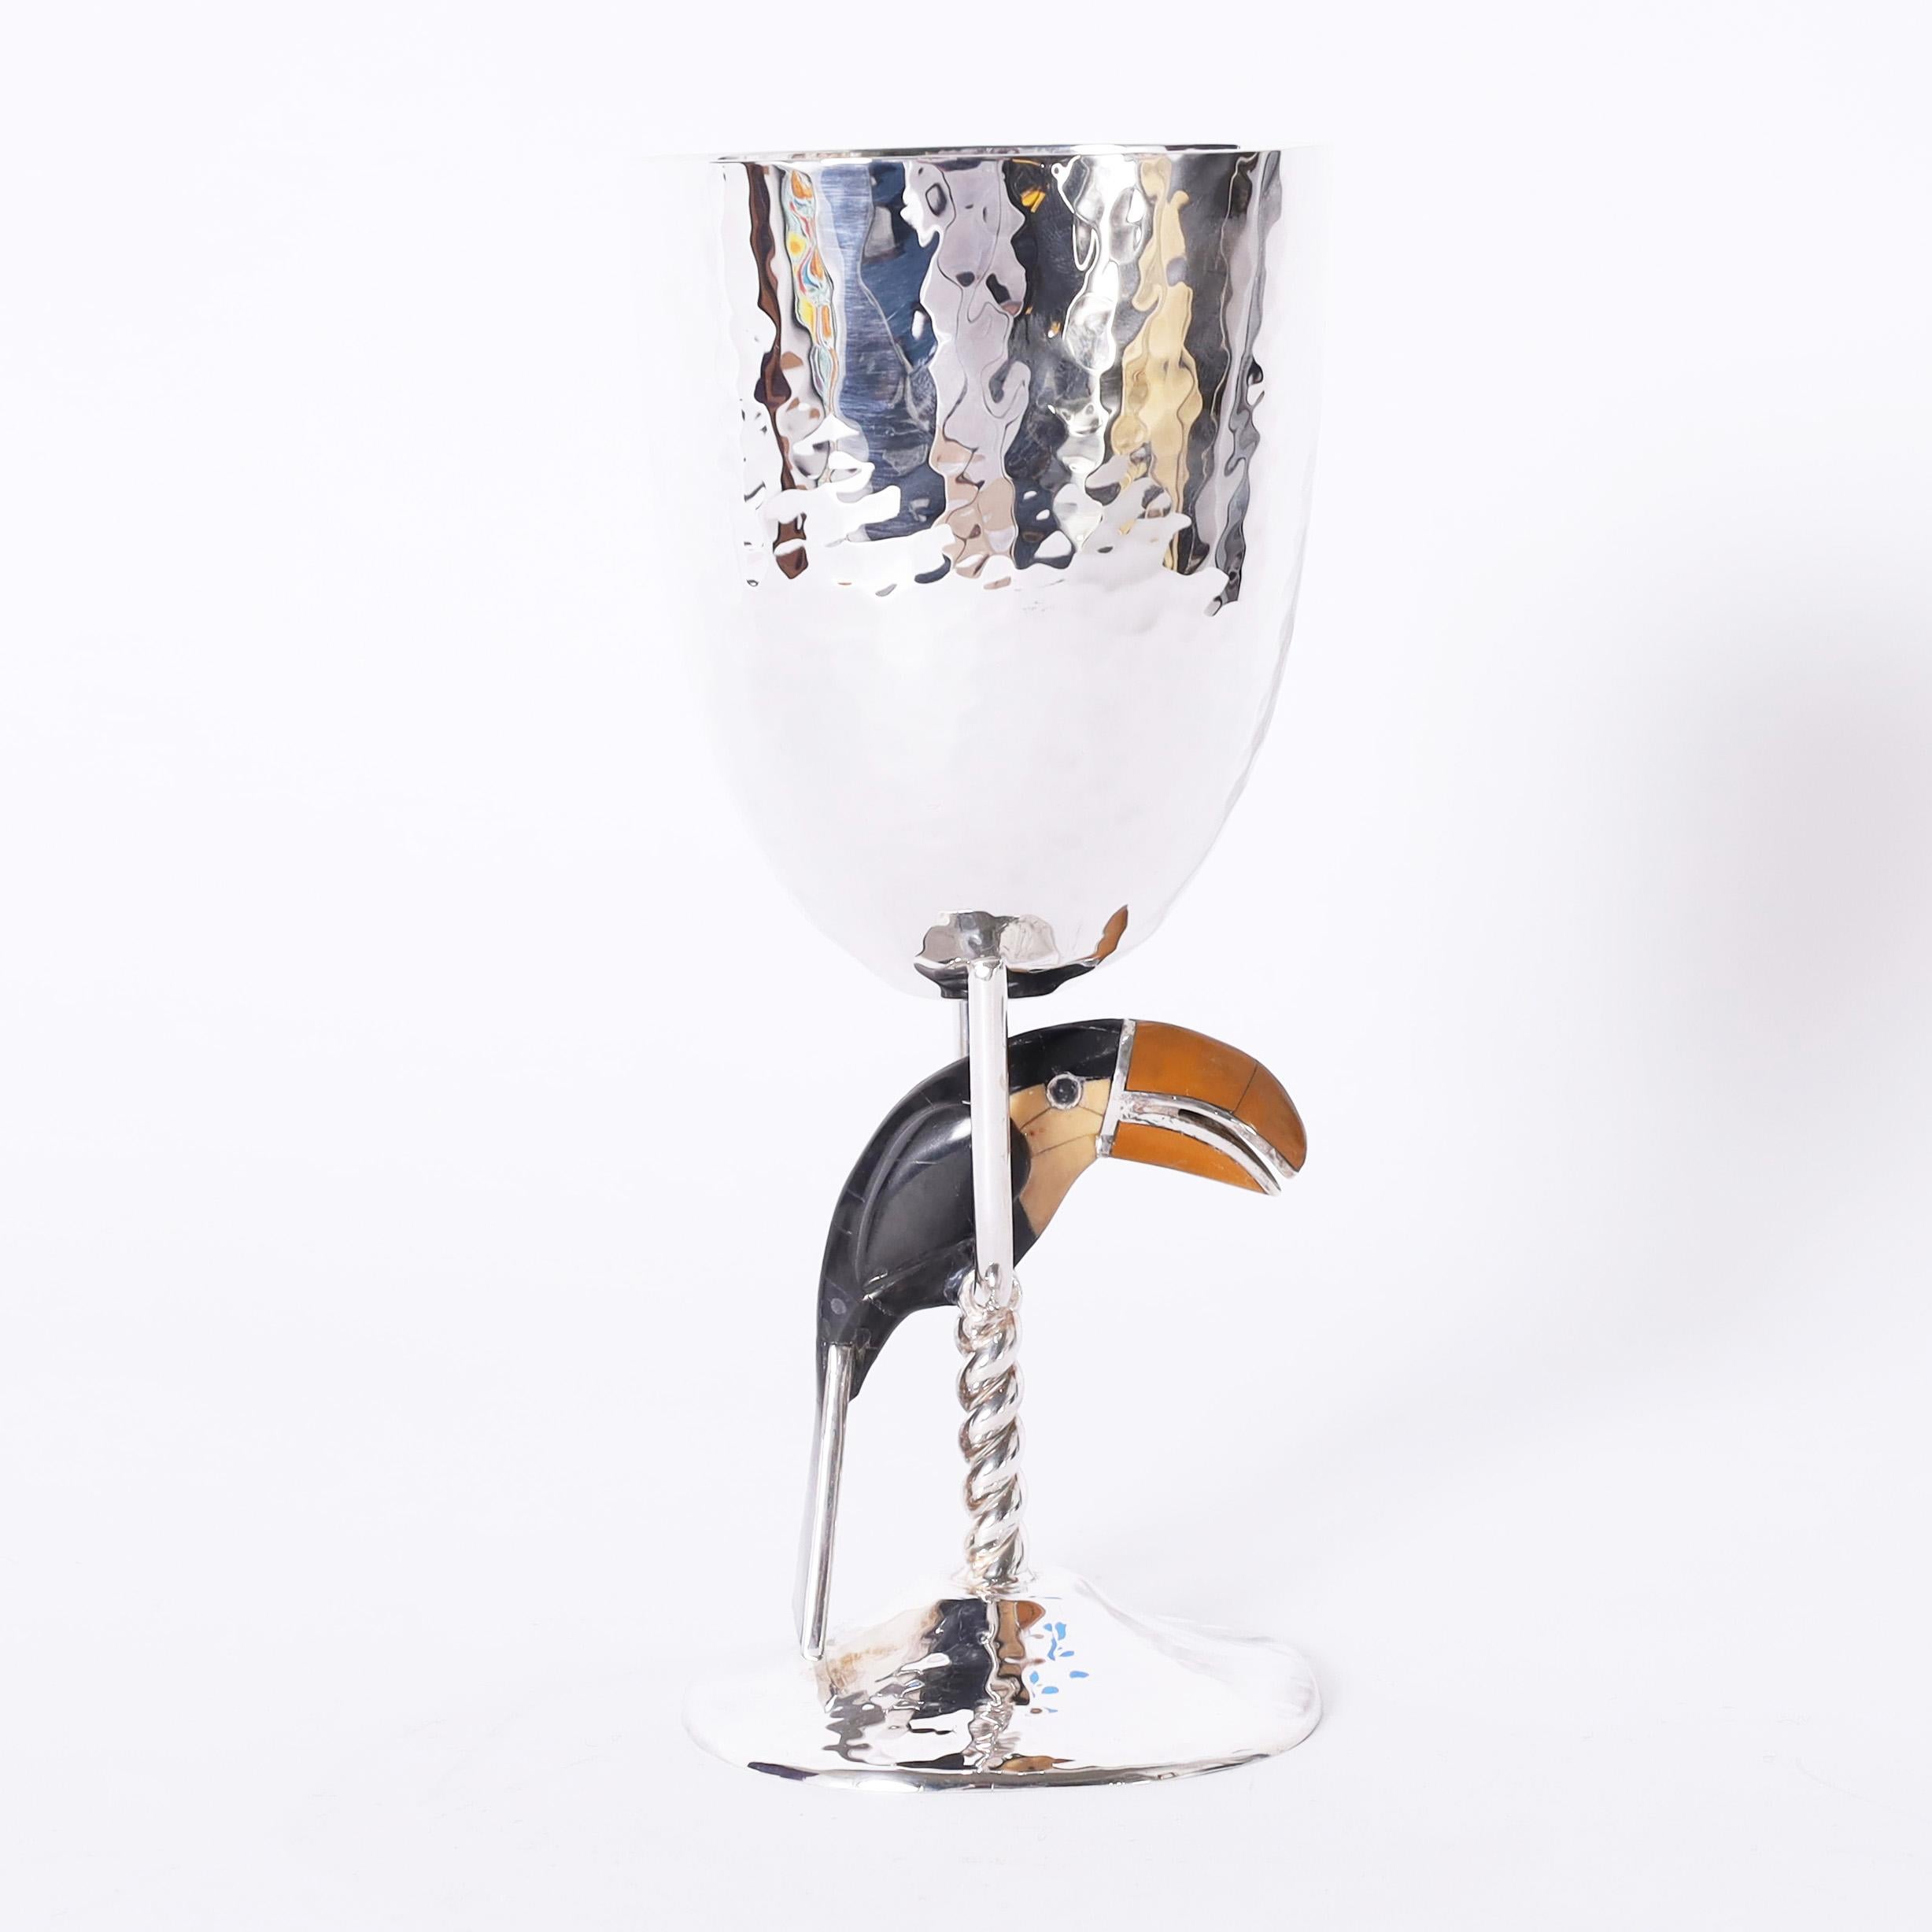 Standout set of eight vintage goblets or wine glasses handcrafted in silver plate over hammered copper in classic form and featuring stone clad toucans perched over the twisted stems. Signed Emilia Castillo on the bottoms.